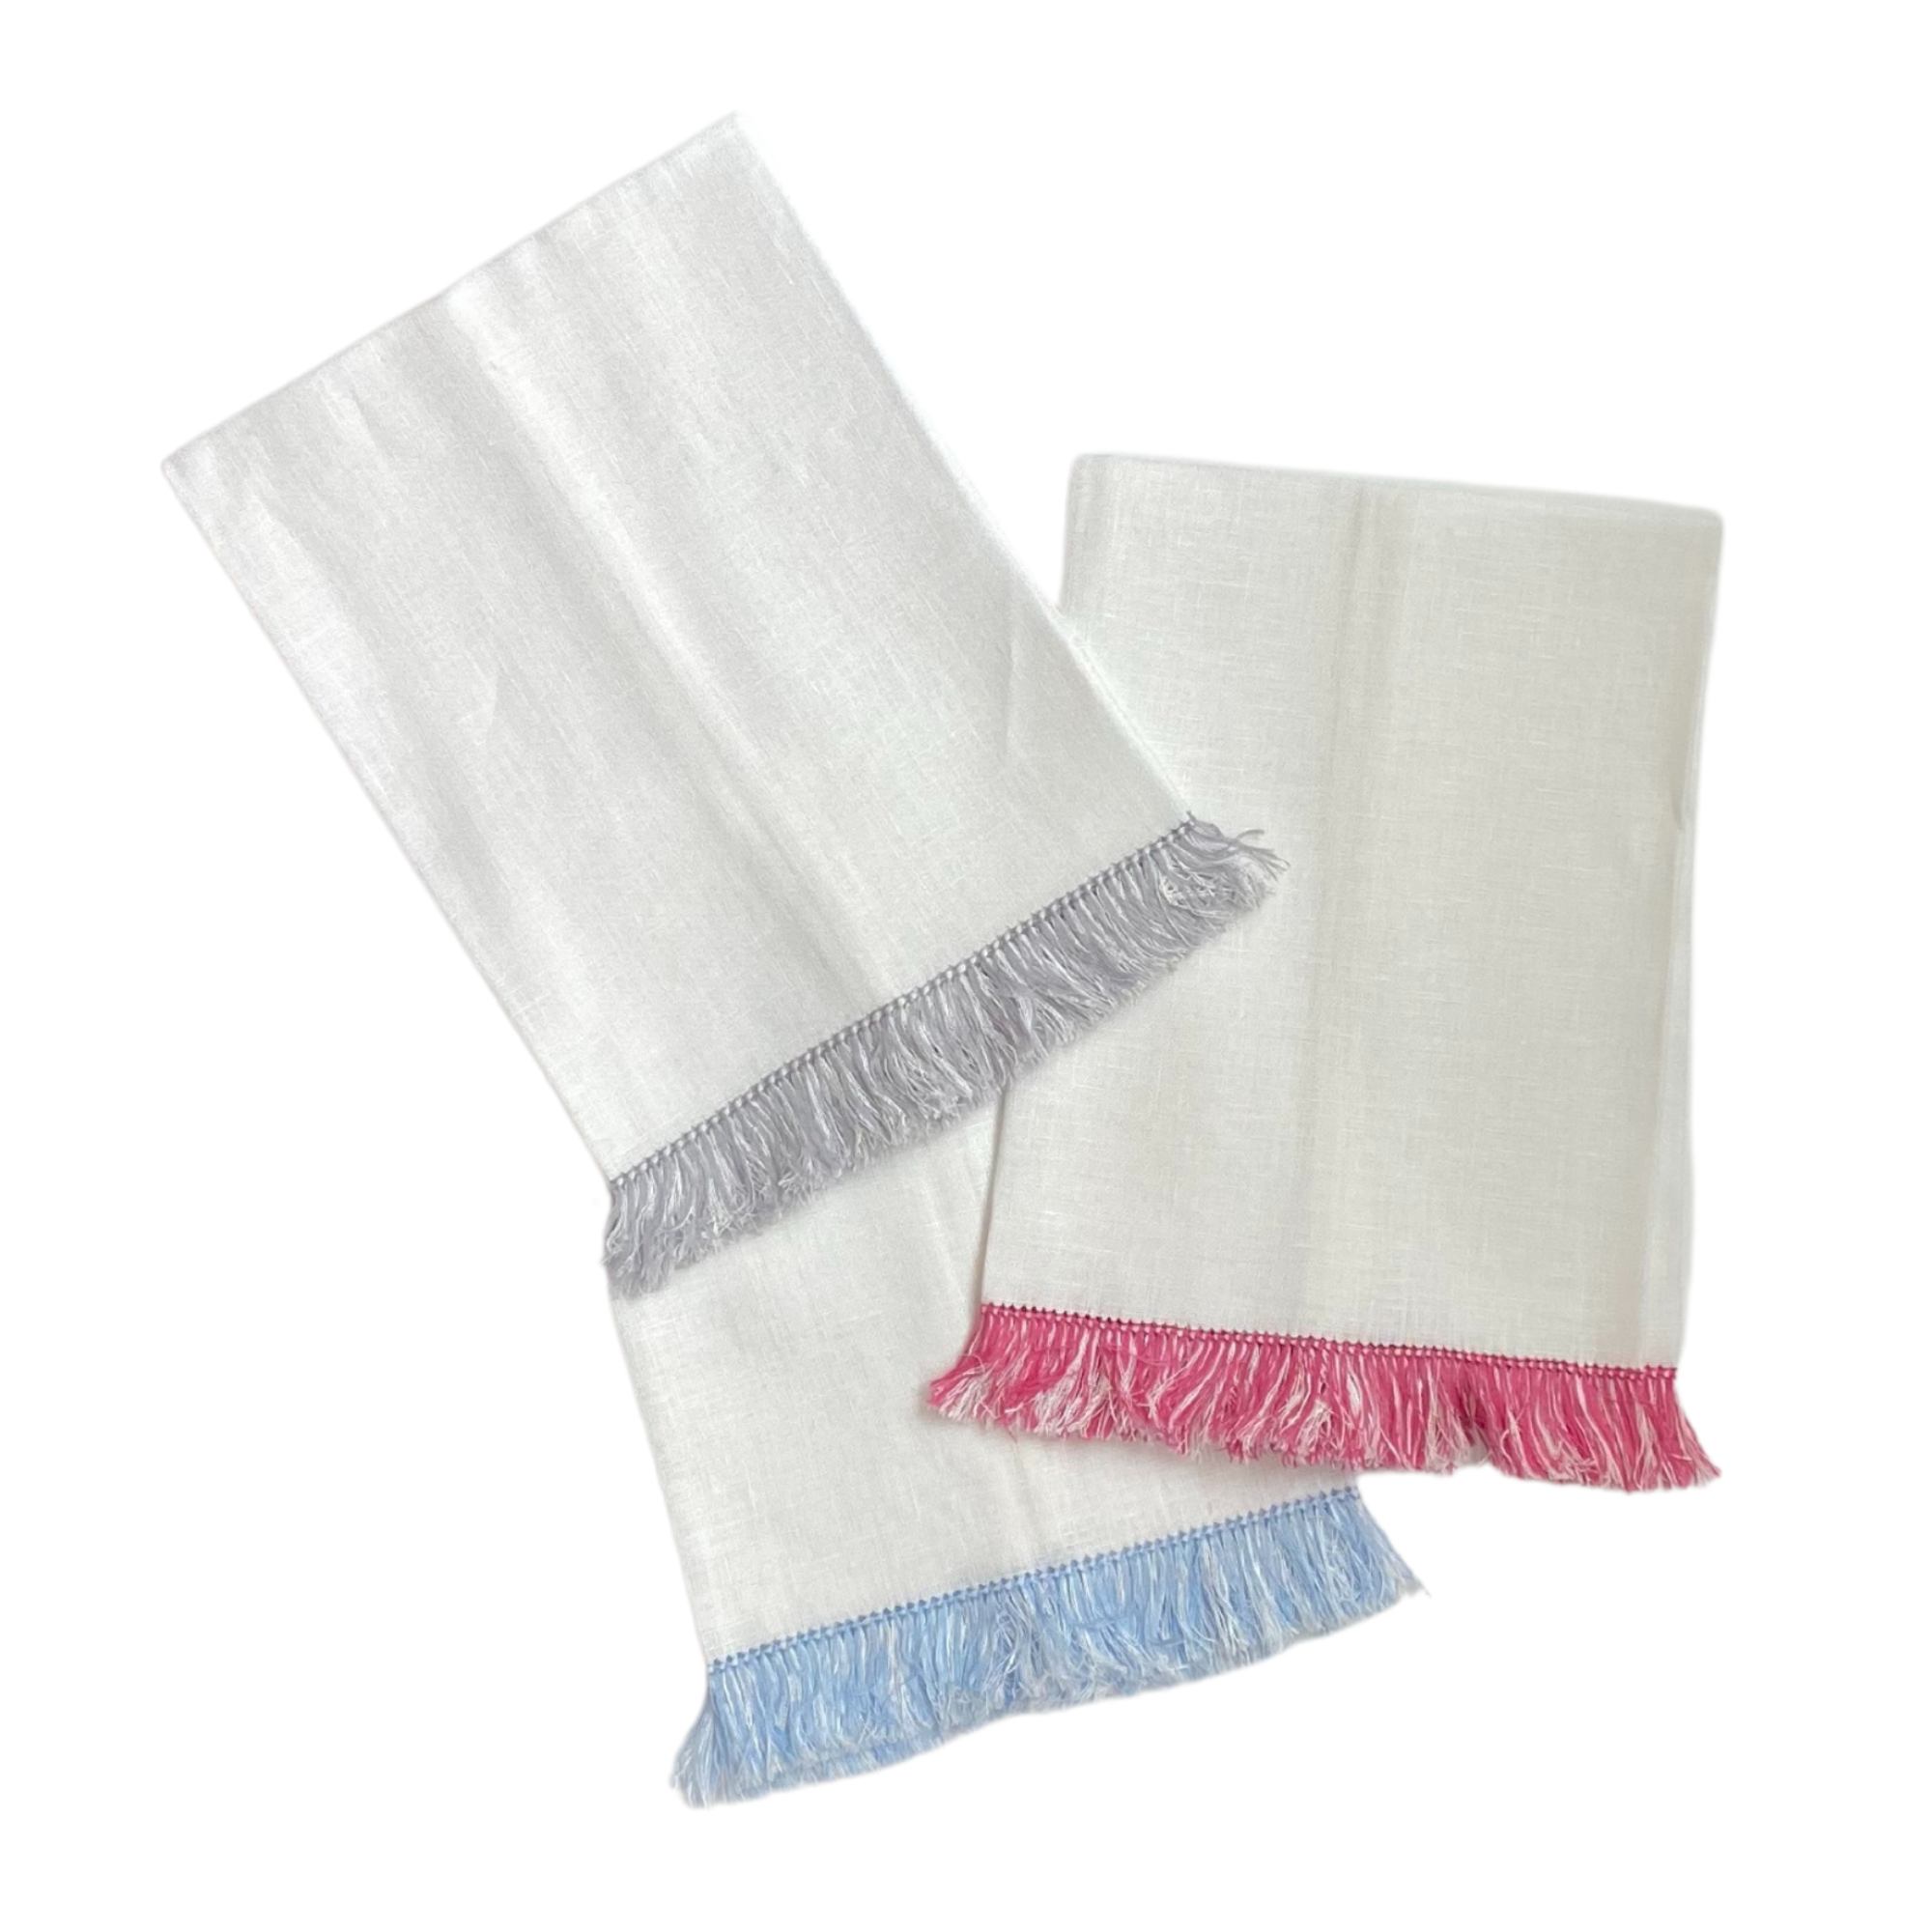 Fringe Benefits Guest Towel Grass Green | Garden Folly Fine Linens - hand towels for embroidering, fancy linen hand towels, fancy linen guest towels